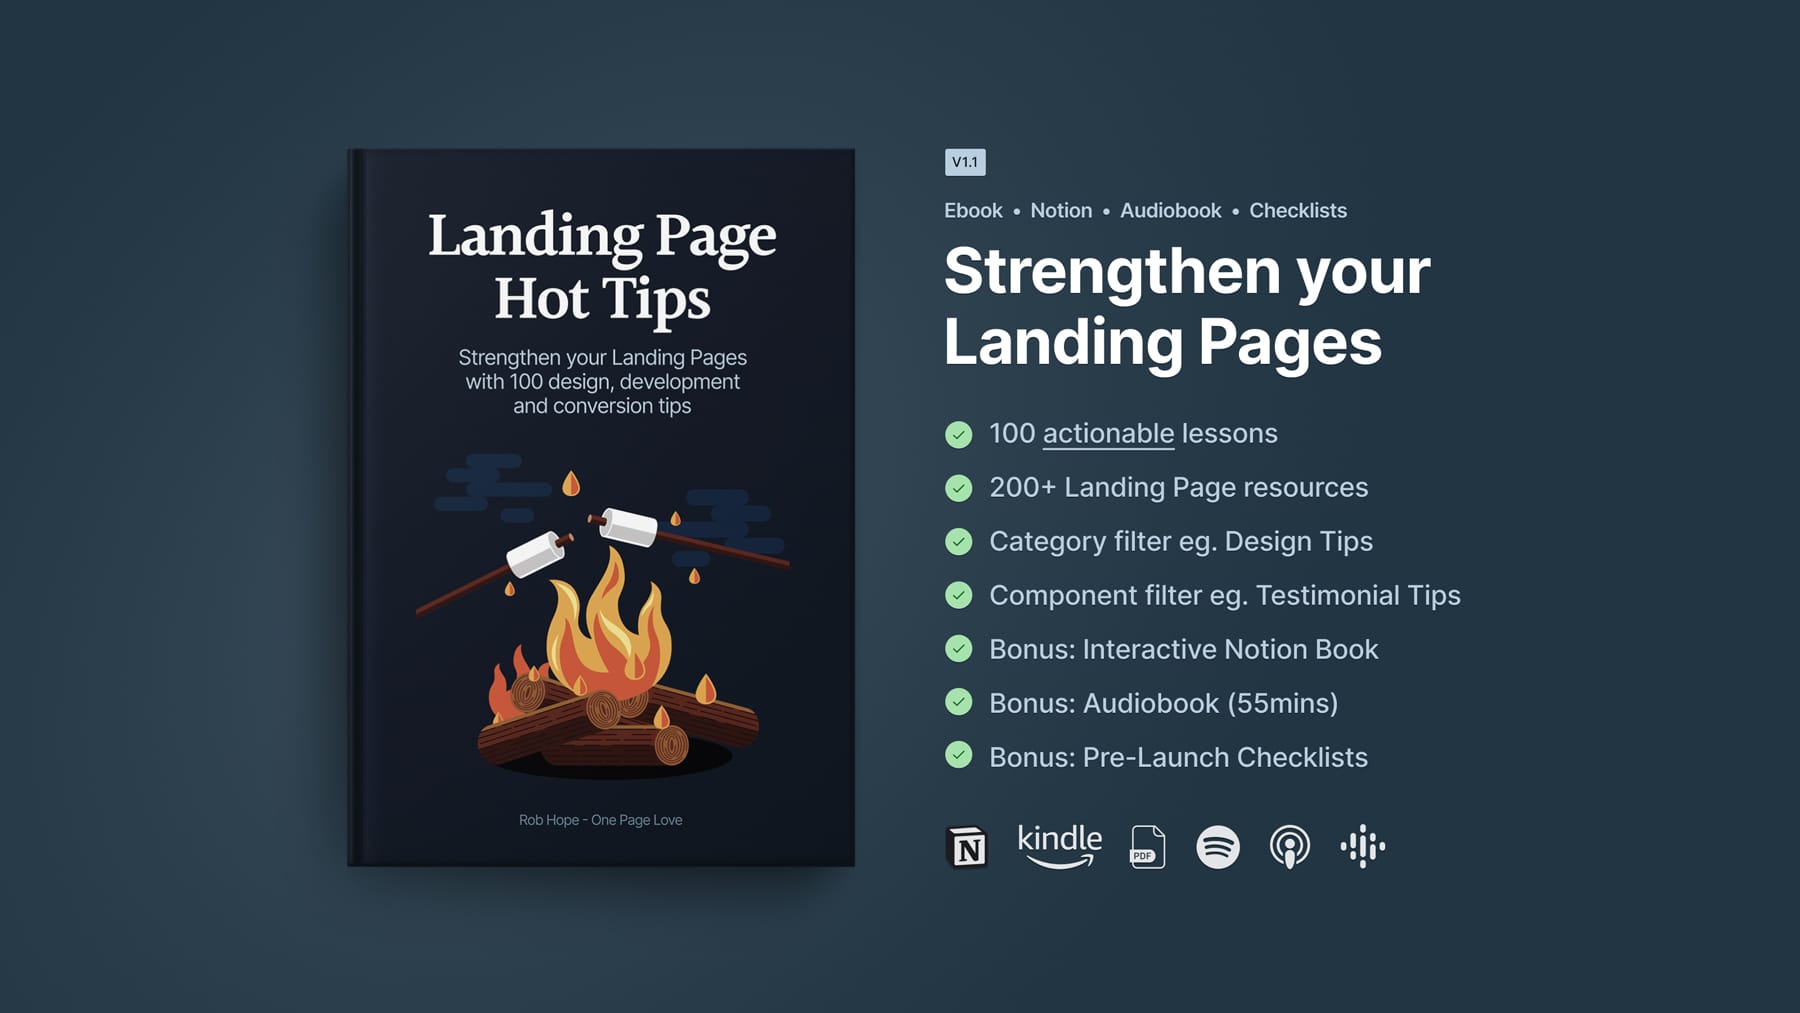 Affiliate recommendation: Landing Page Hot Tips Ebook